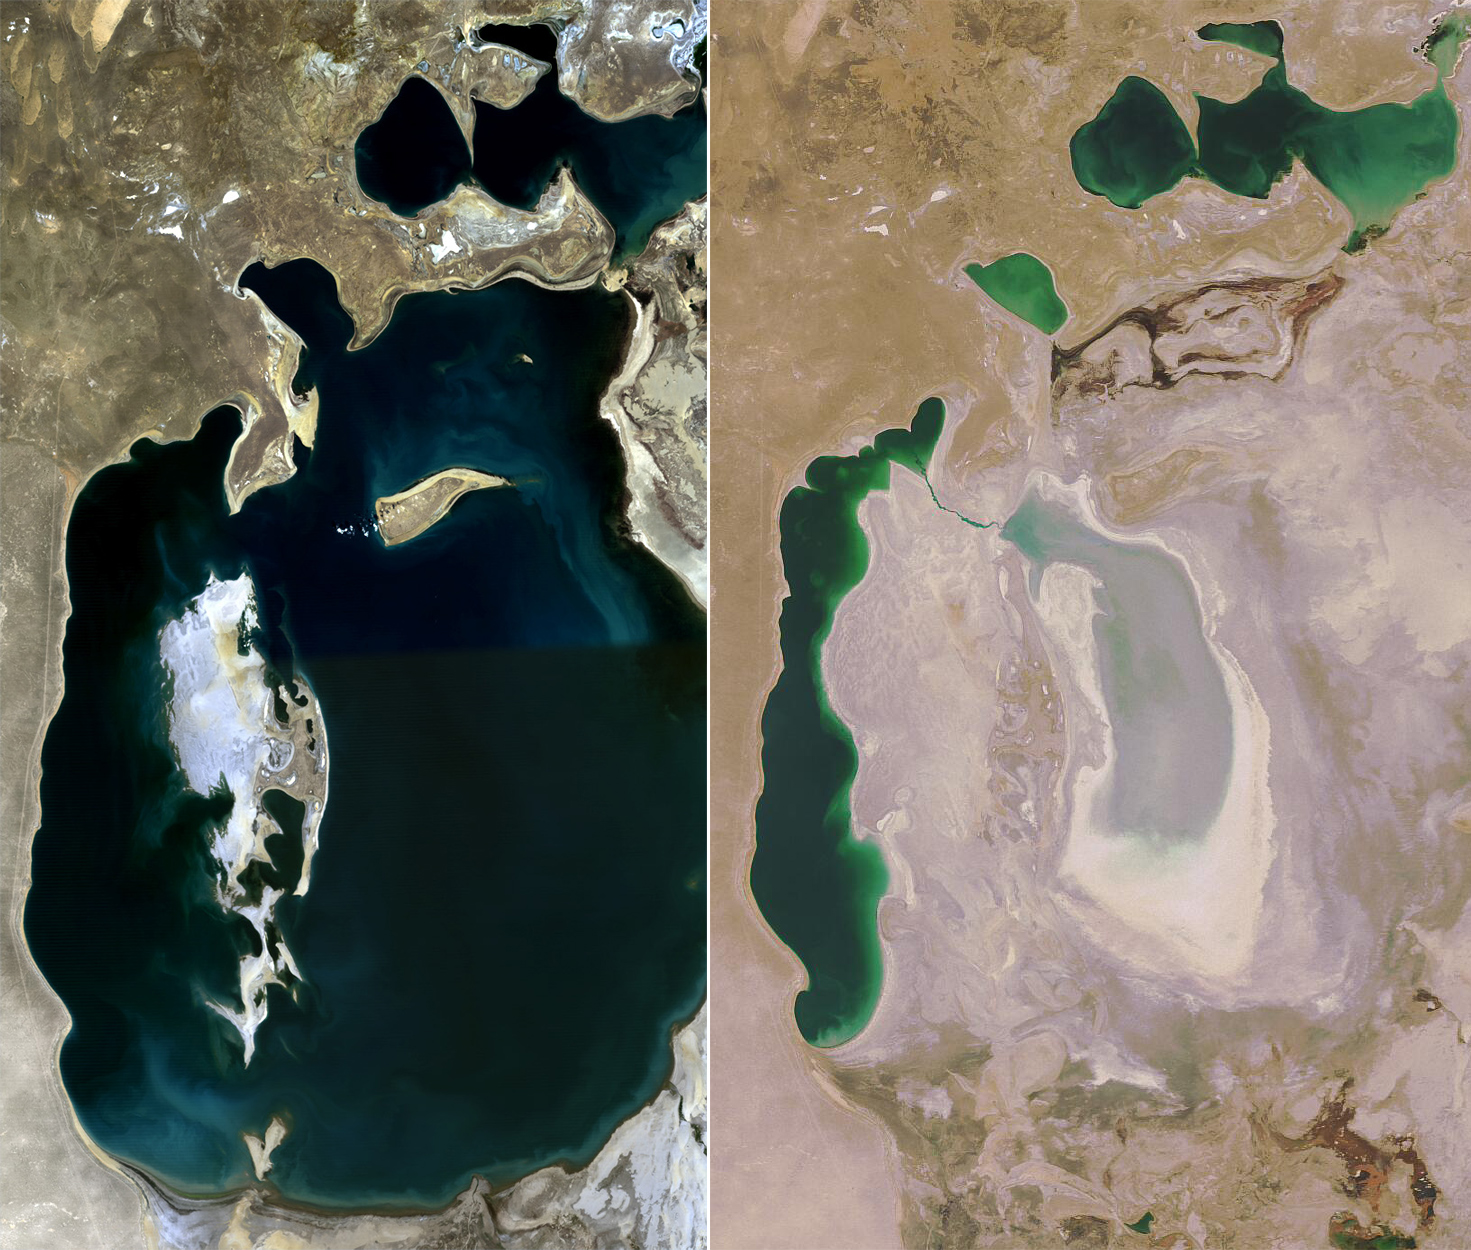 The Aral Sea in 1989 and 2008